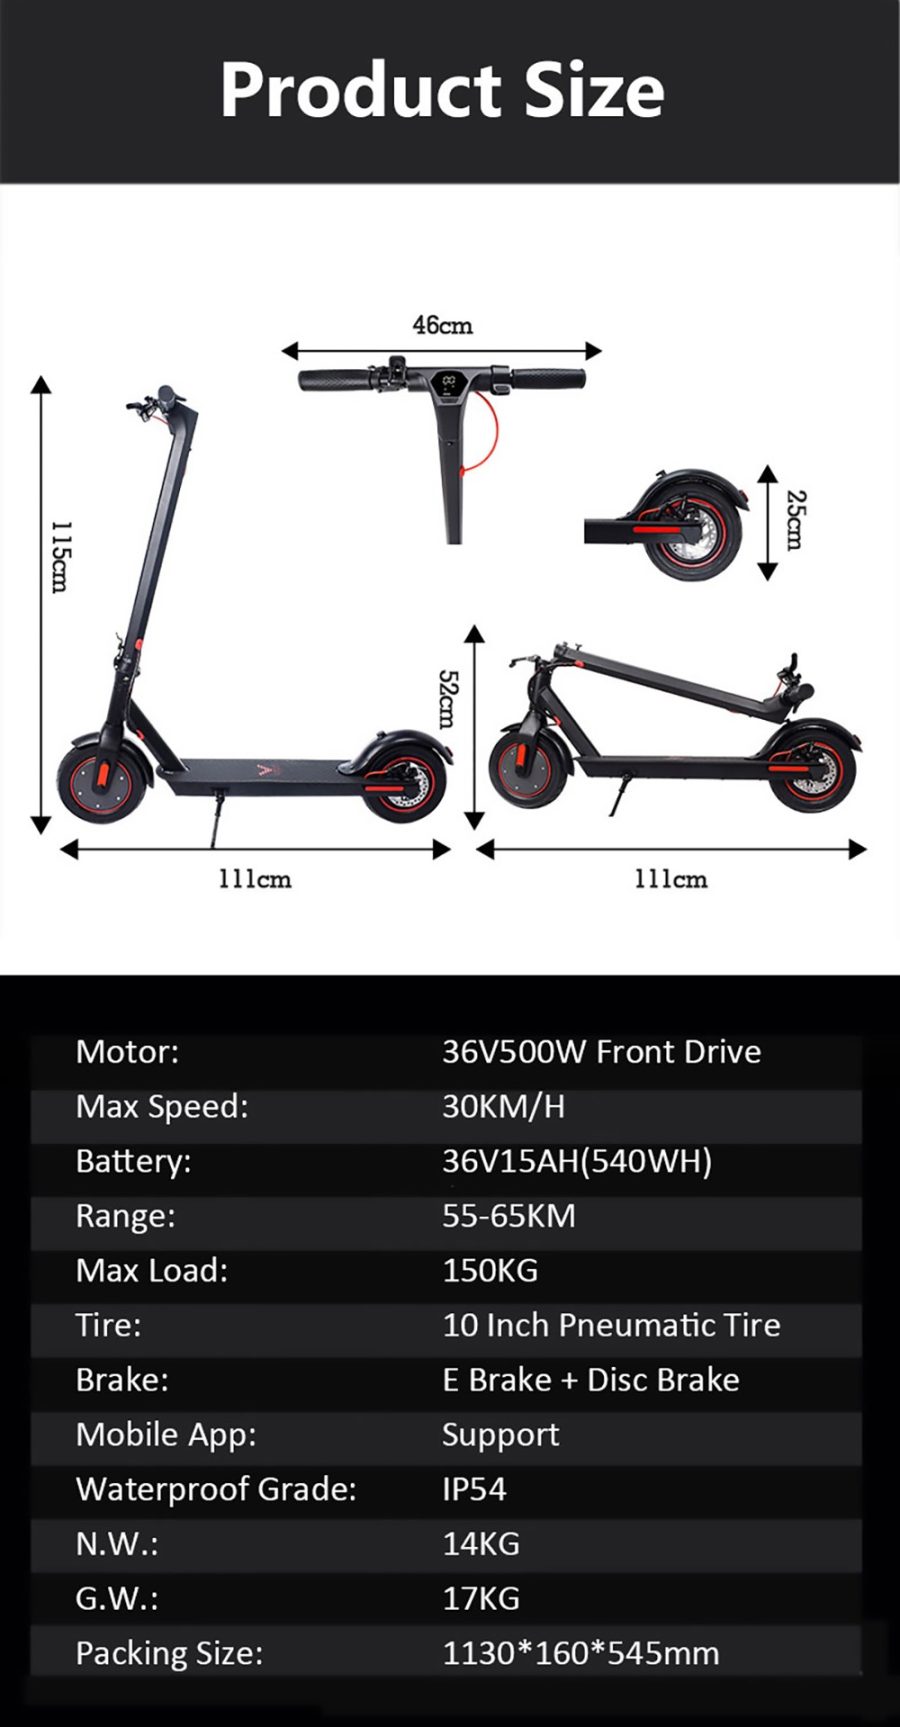 CMSBIKE V Electric Scooter Air Tires Black